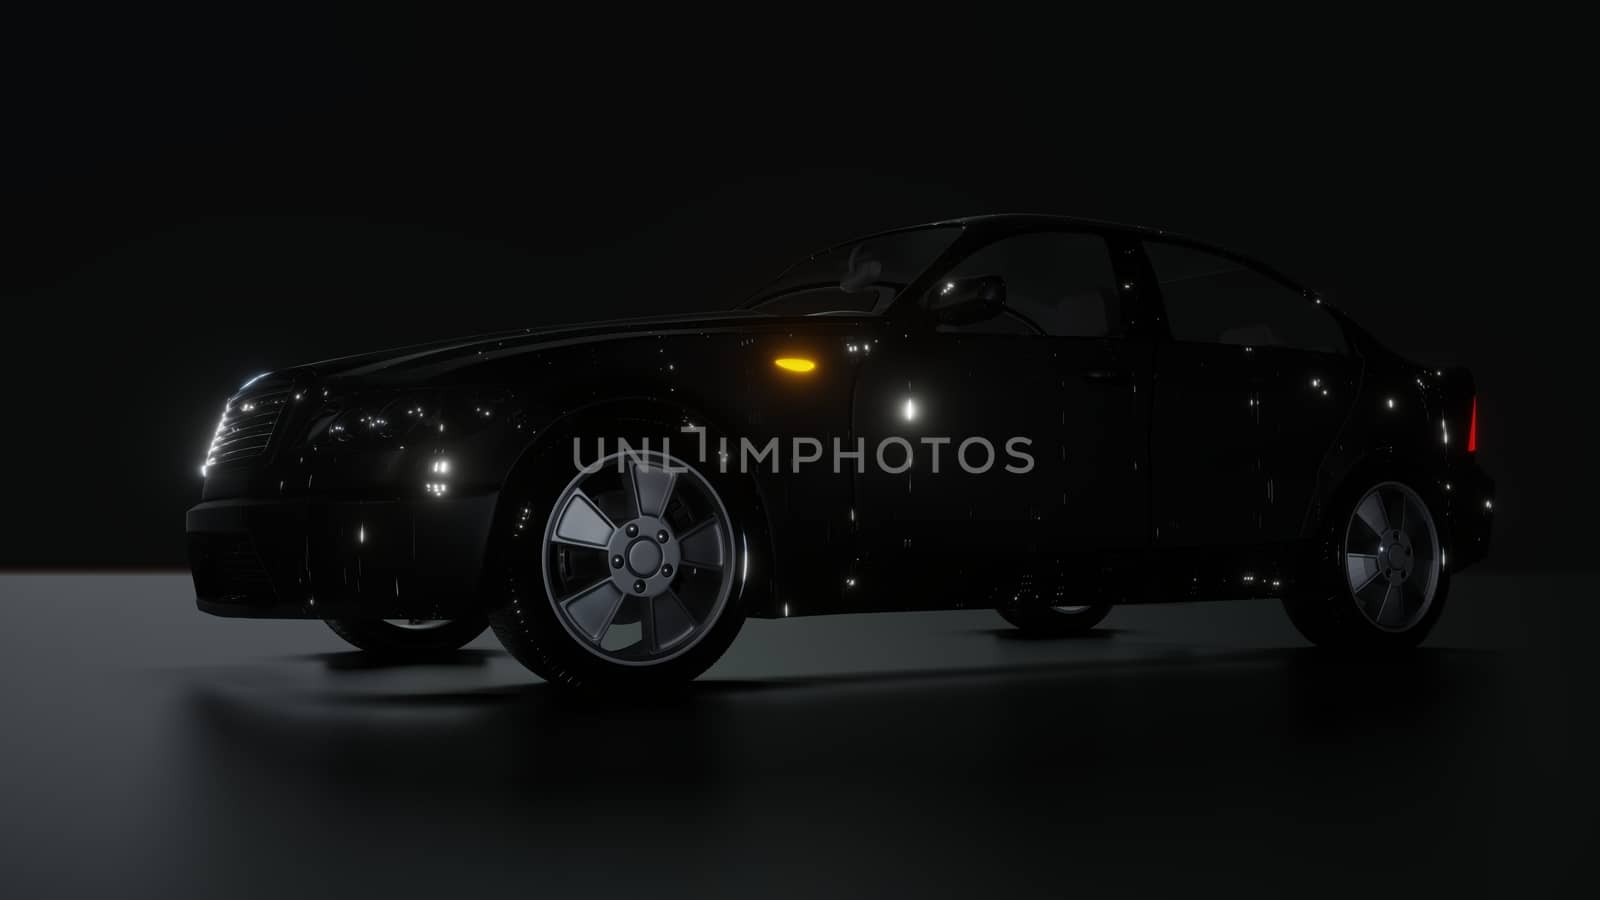 Black Brandless Car on Dark Background. 3D illustration. Futuristic car paint with bright luminous chaotic patterns